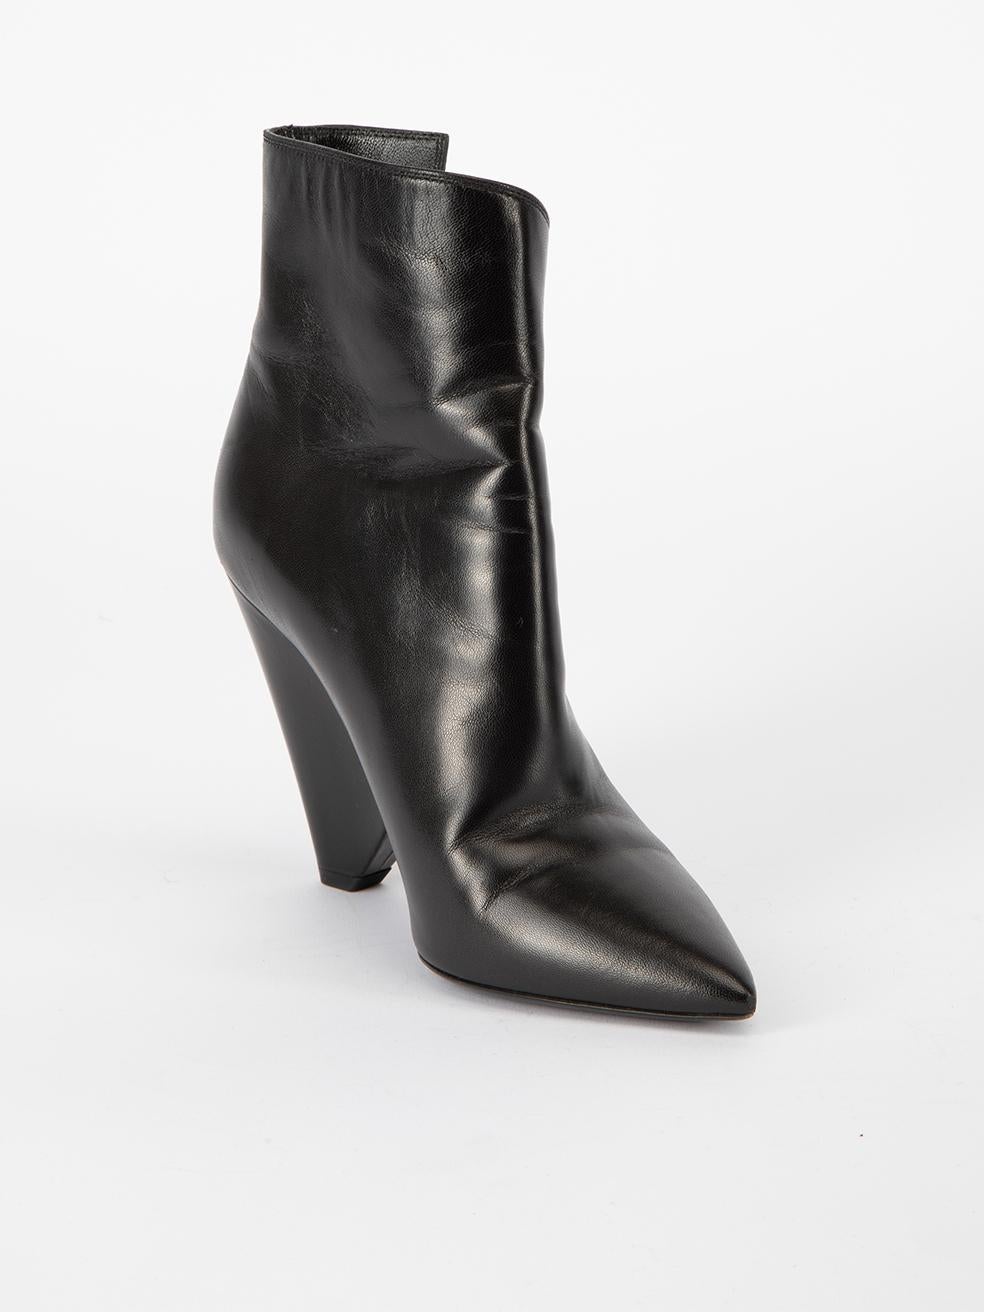 CONDITION is Very good. Minimal wear to shoes is evident. Minimal creasing to leather exterior material and light wear to toe points on this used Saint Laurent designer resale item. 
 
 Details
  Black
 Leather
 Ankle boots
 Pointed toe
 High wedge